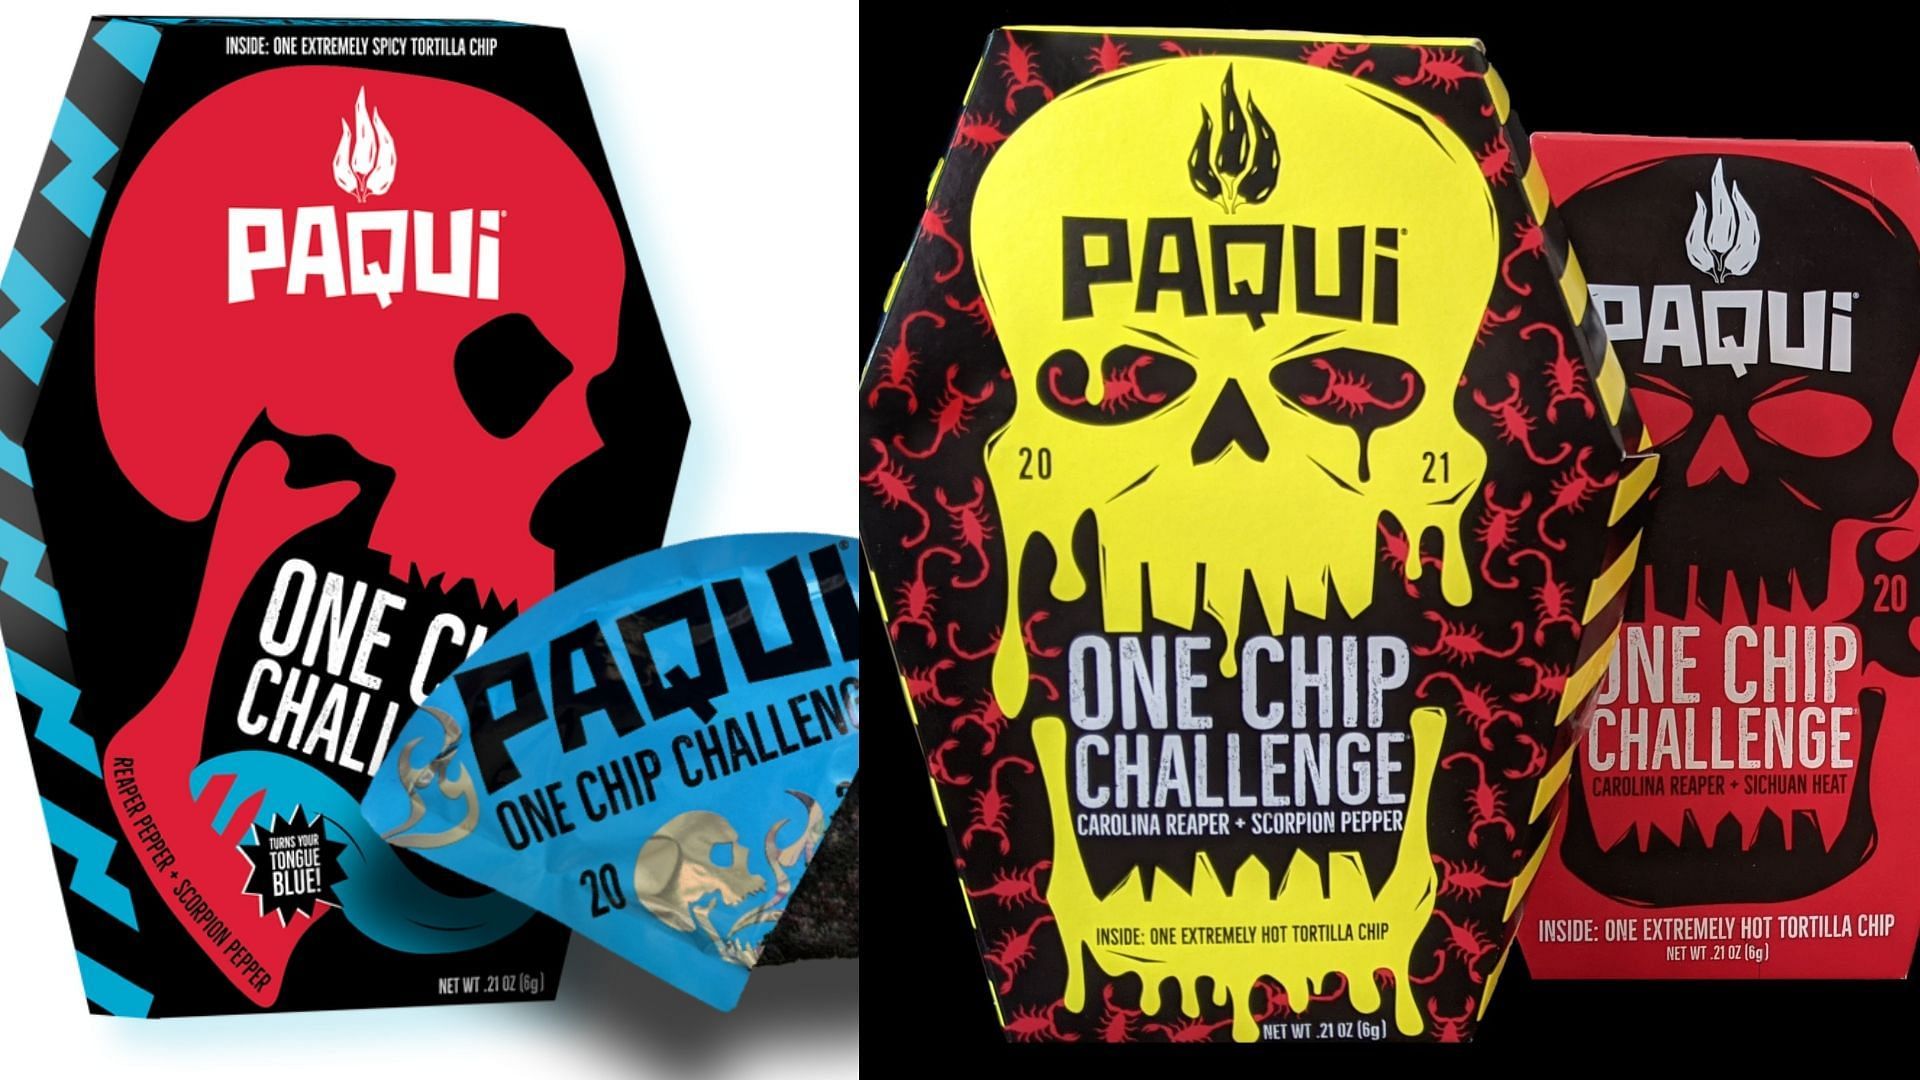 Paqui One Chip Challenge Everything to know about the viral trend as